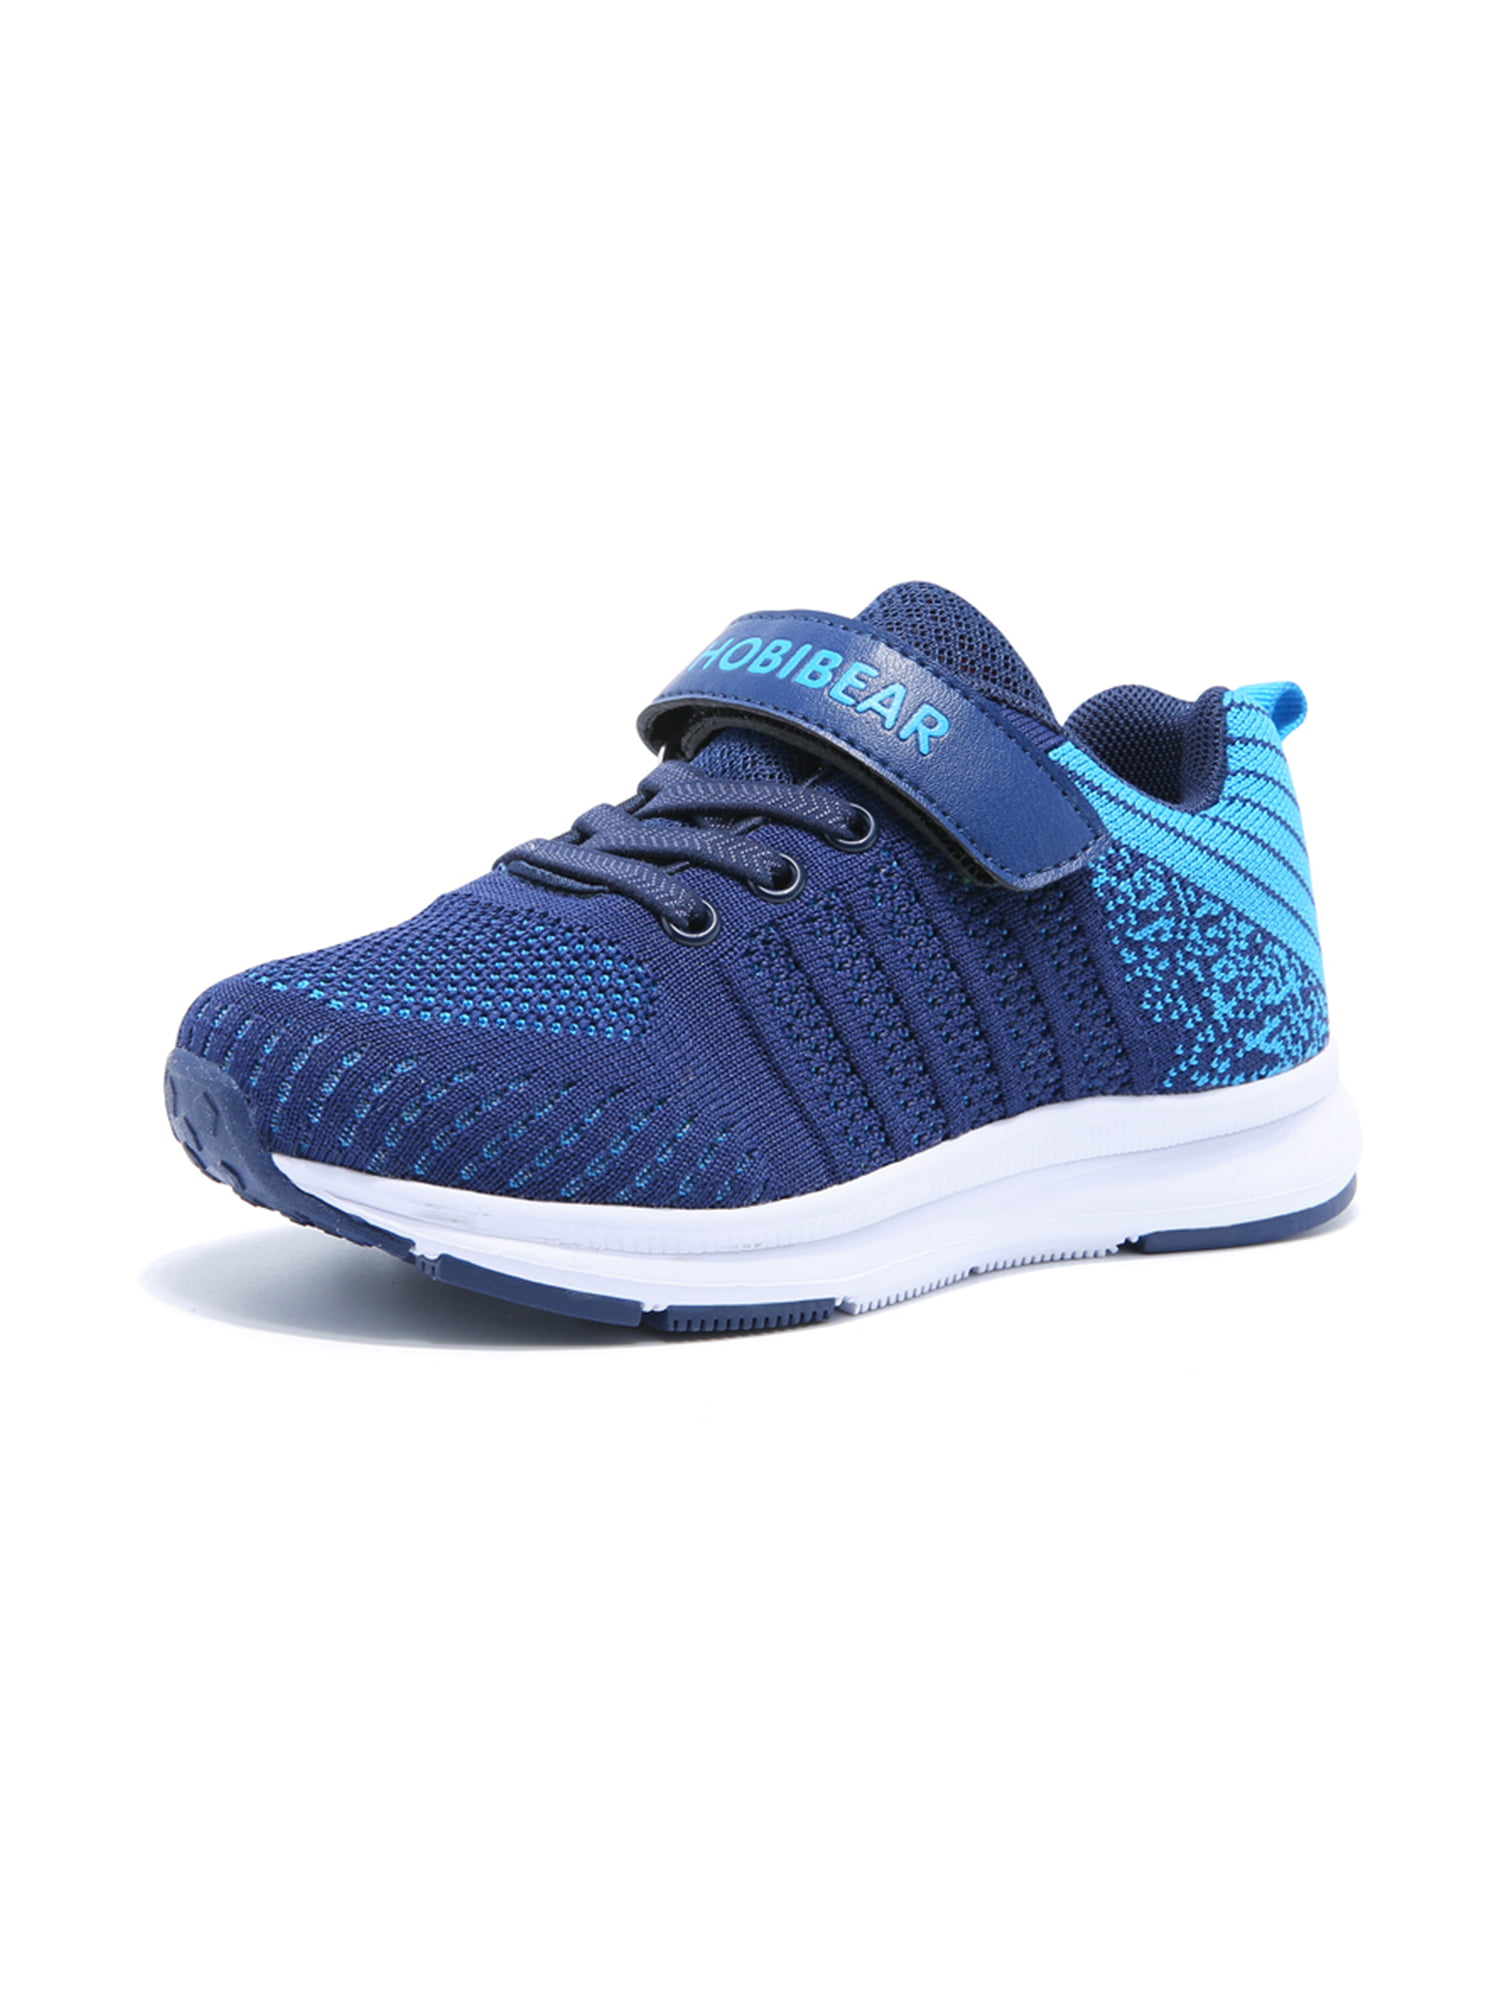 Nuport Kids Running Sports Sneakers Breathable Athletic Walking Shoes for Boys Girls Navy